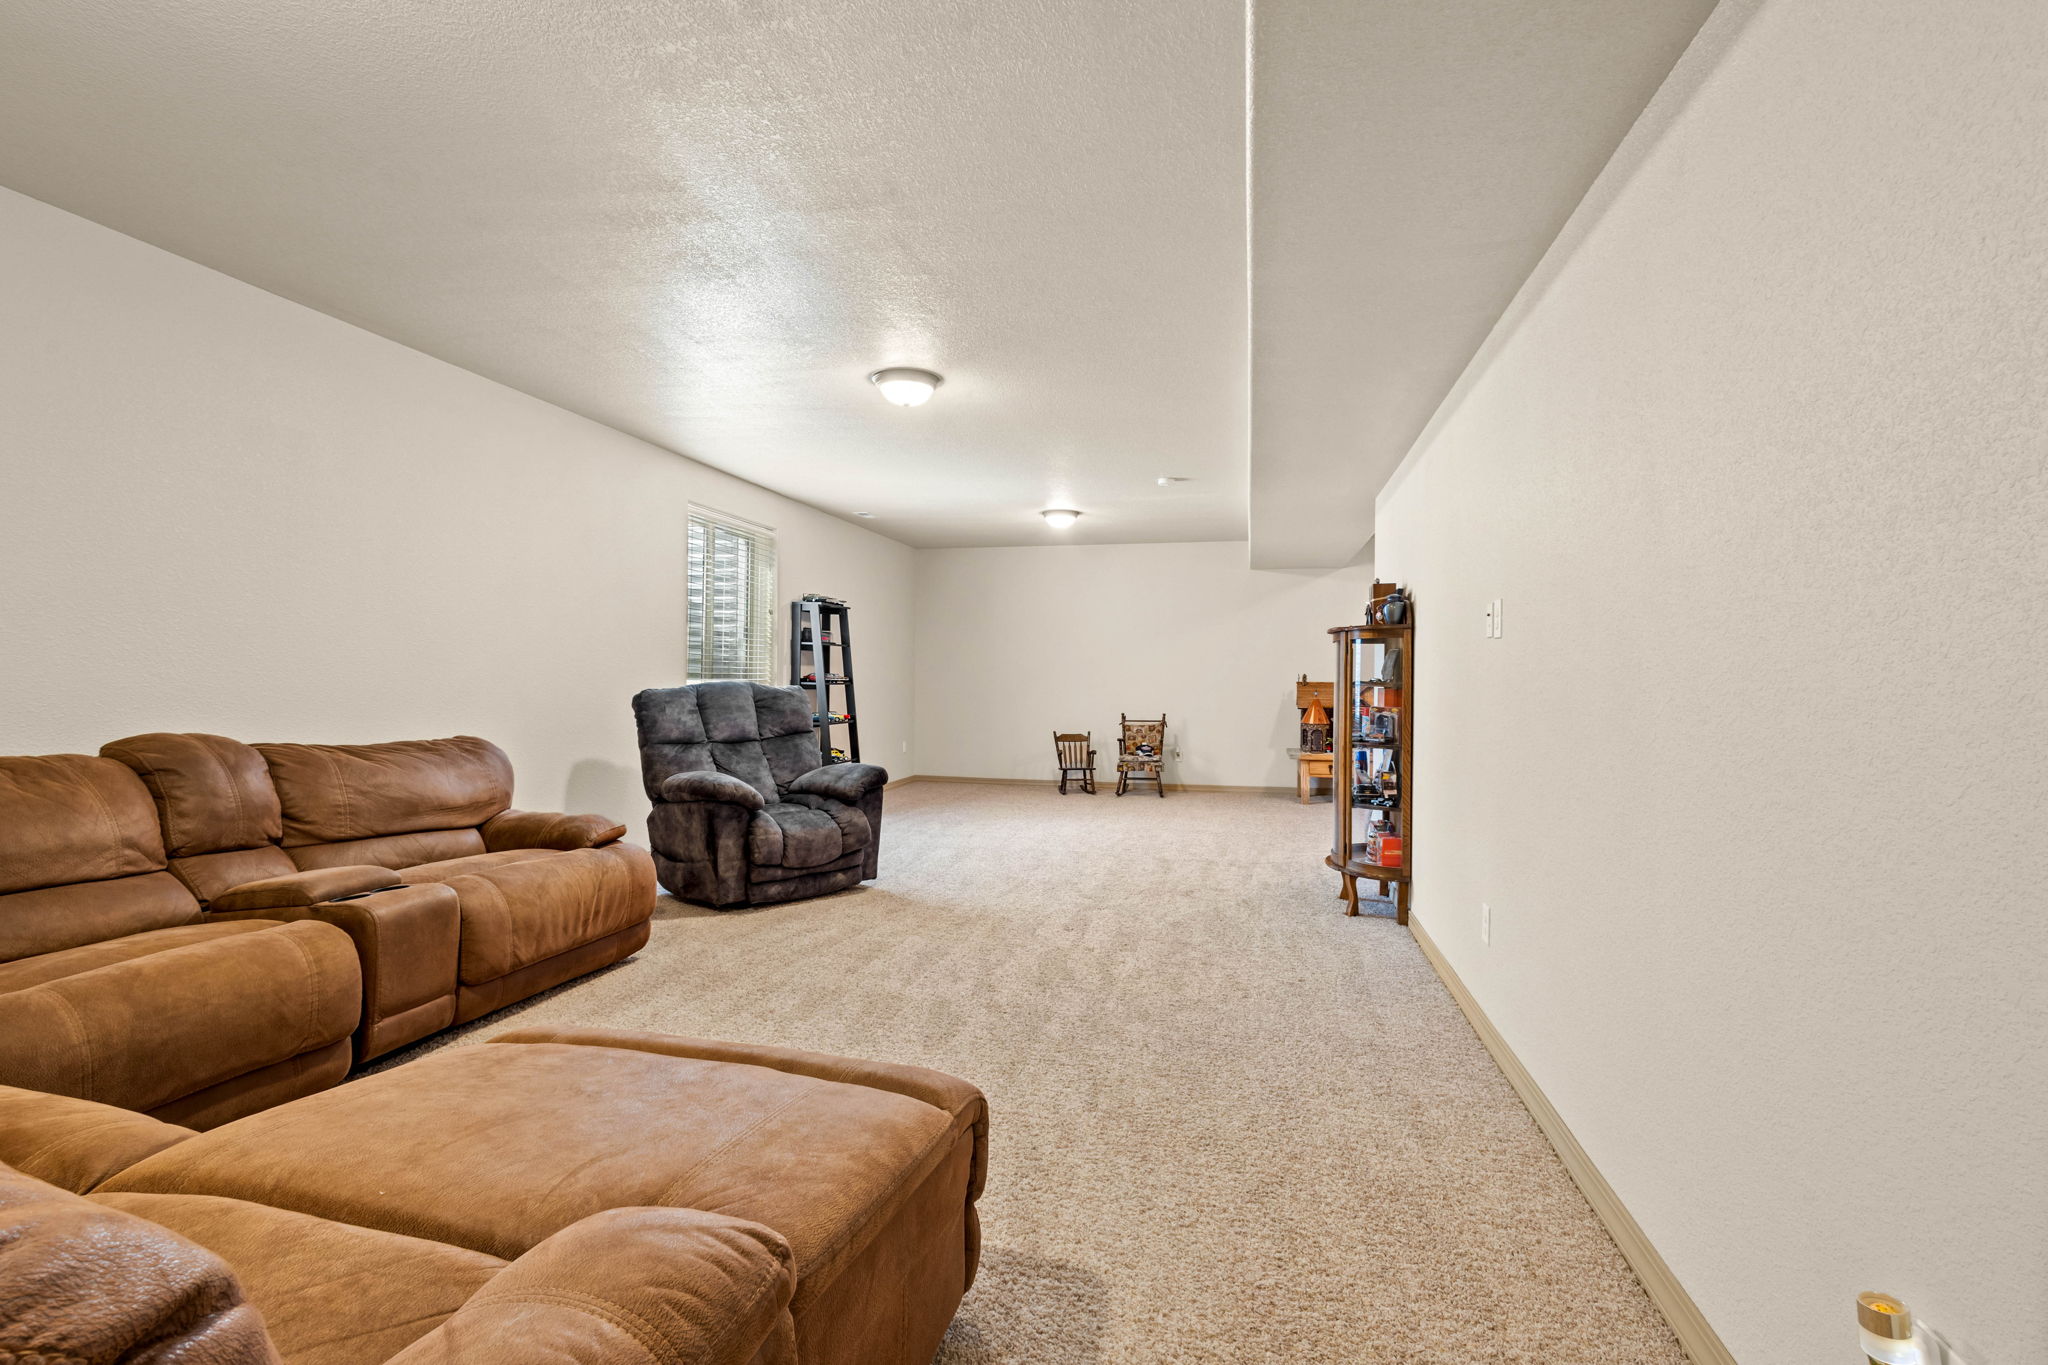 Family Room with ample room to host year round.